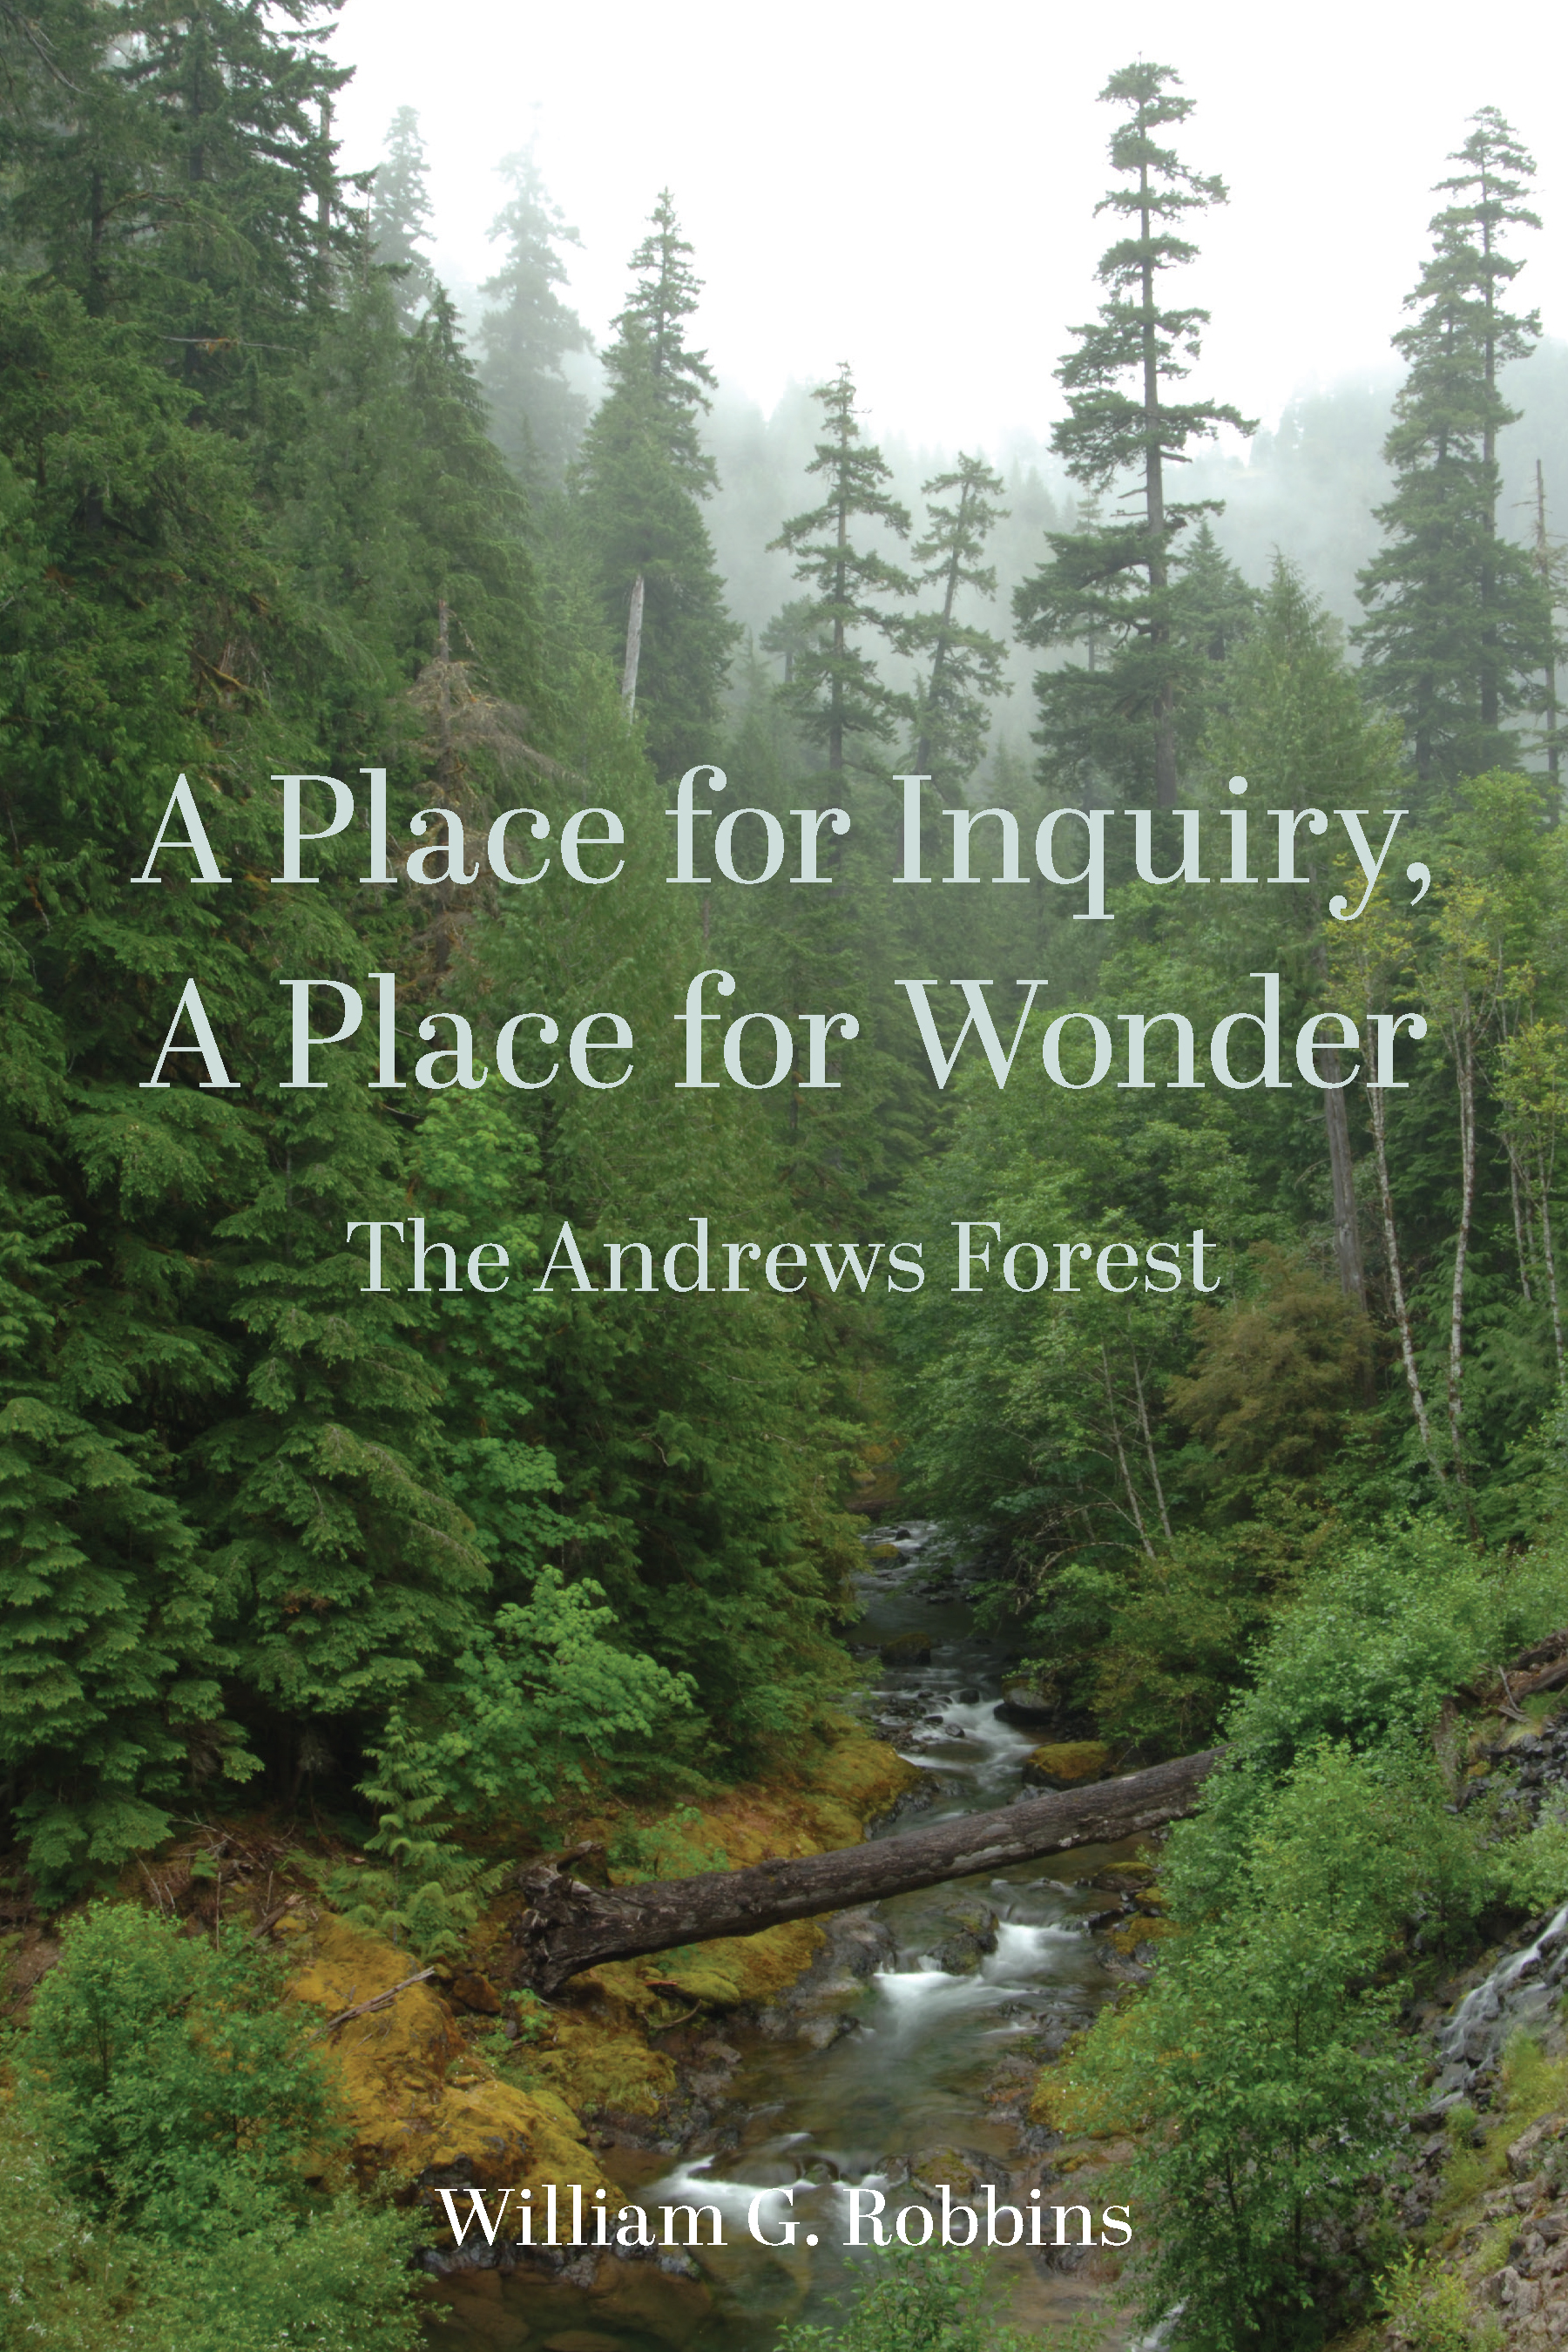 A Place for Inquiry